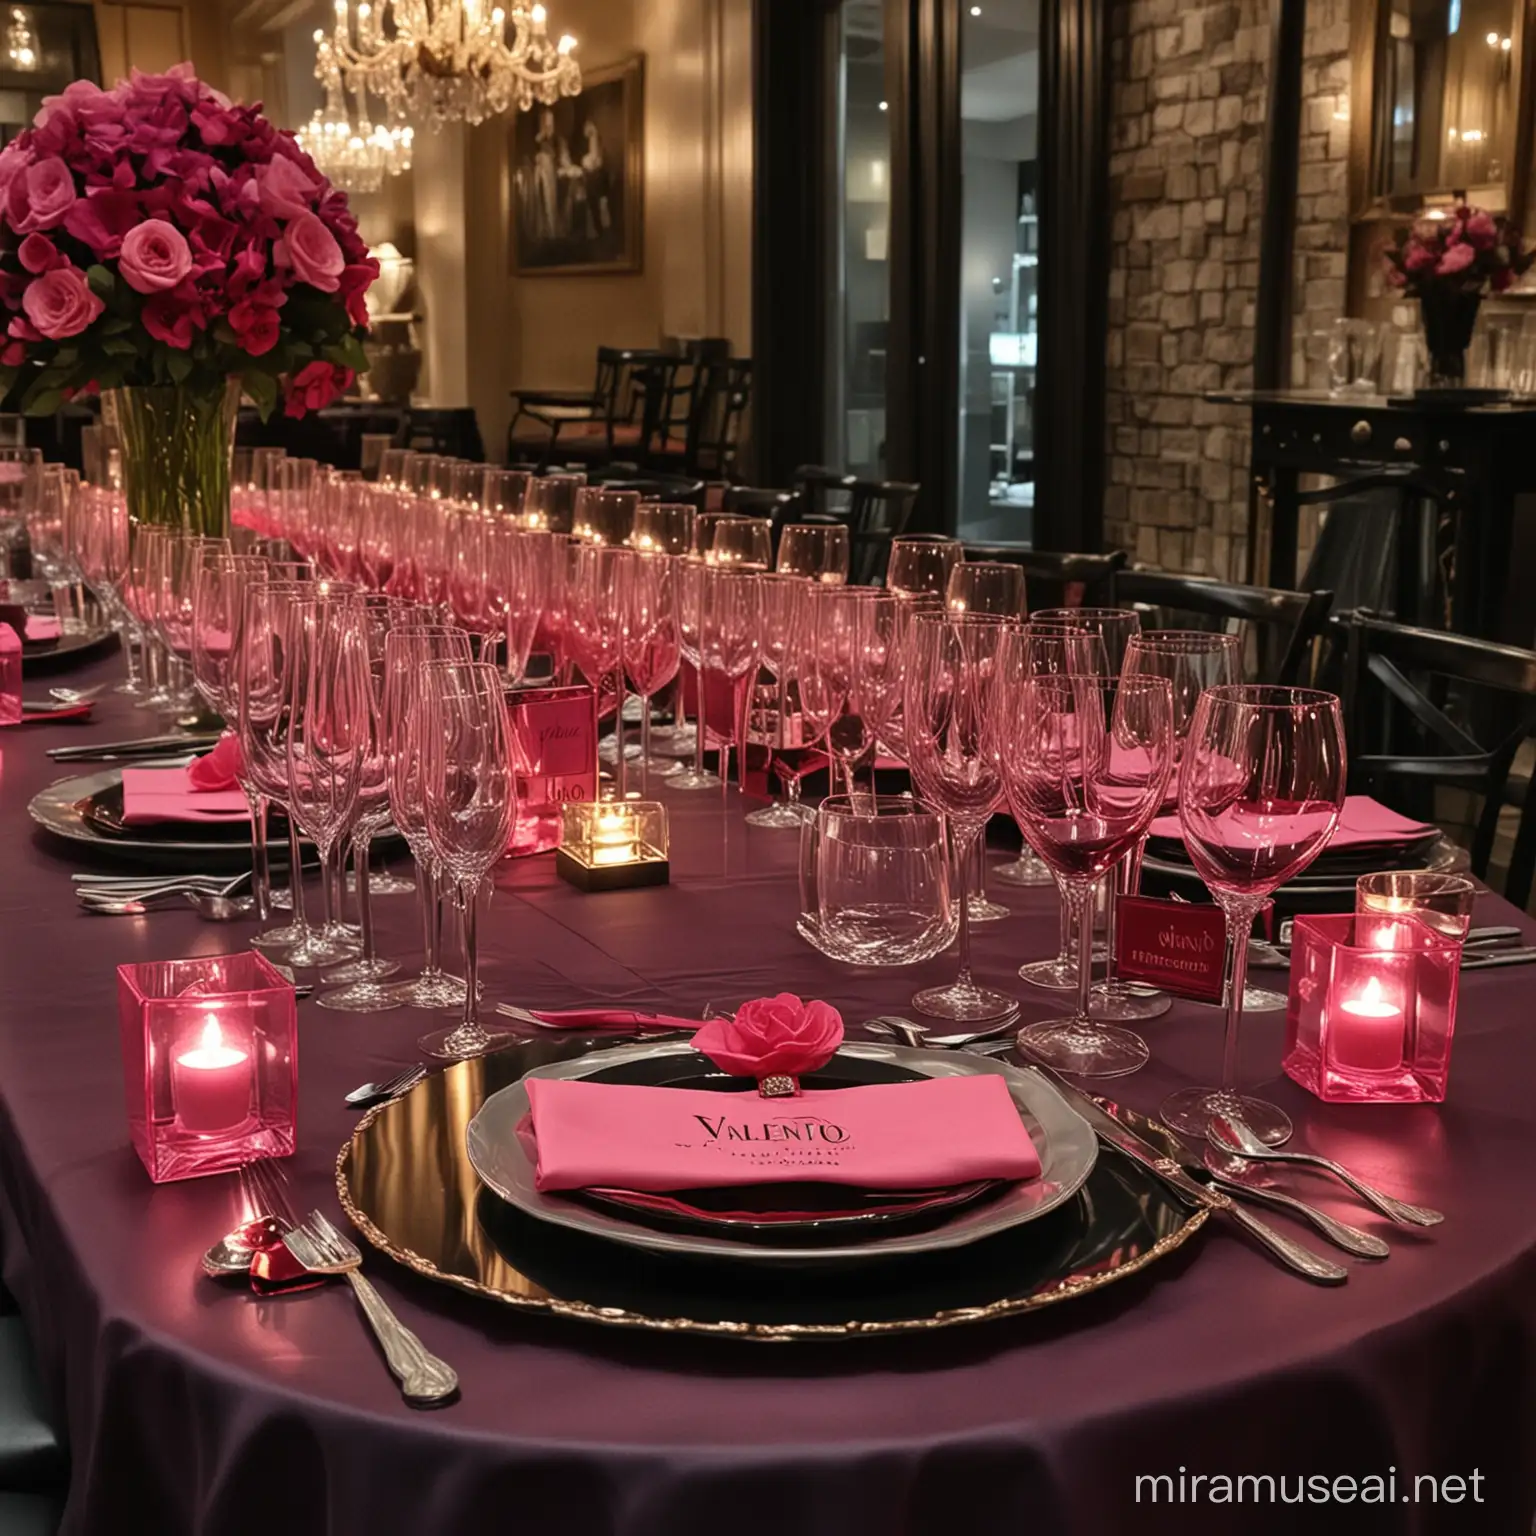 Luxurious Valentino Born in Roma Intense Perfume Launch Party Table Setting